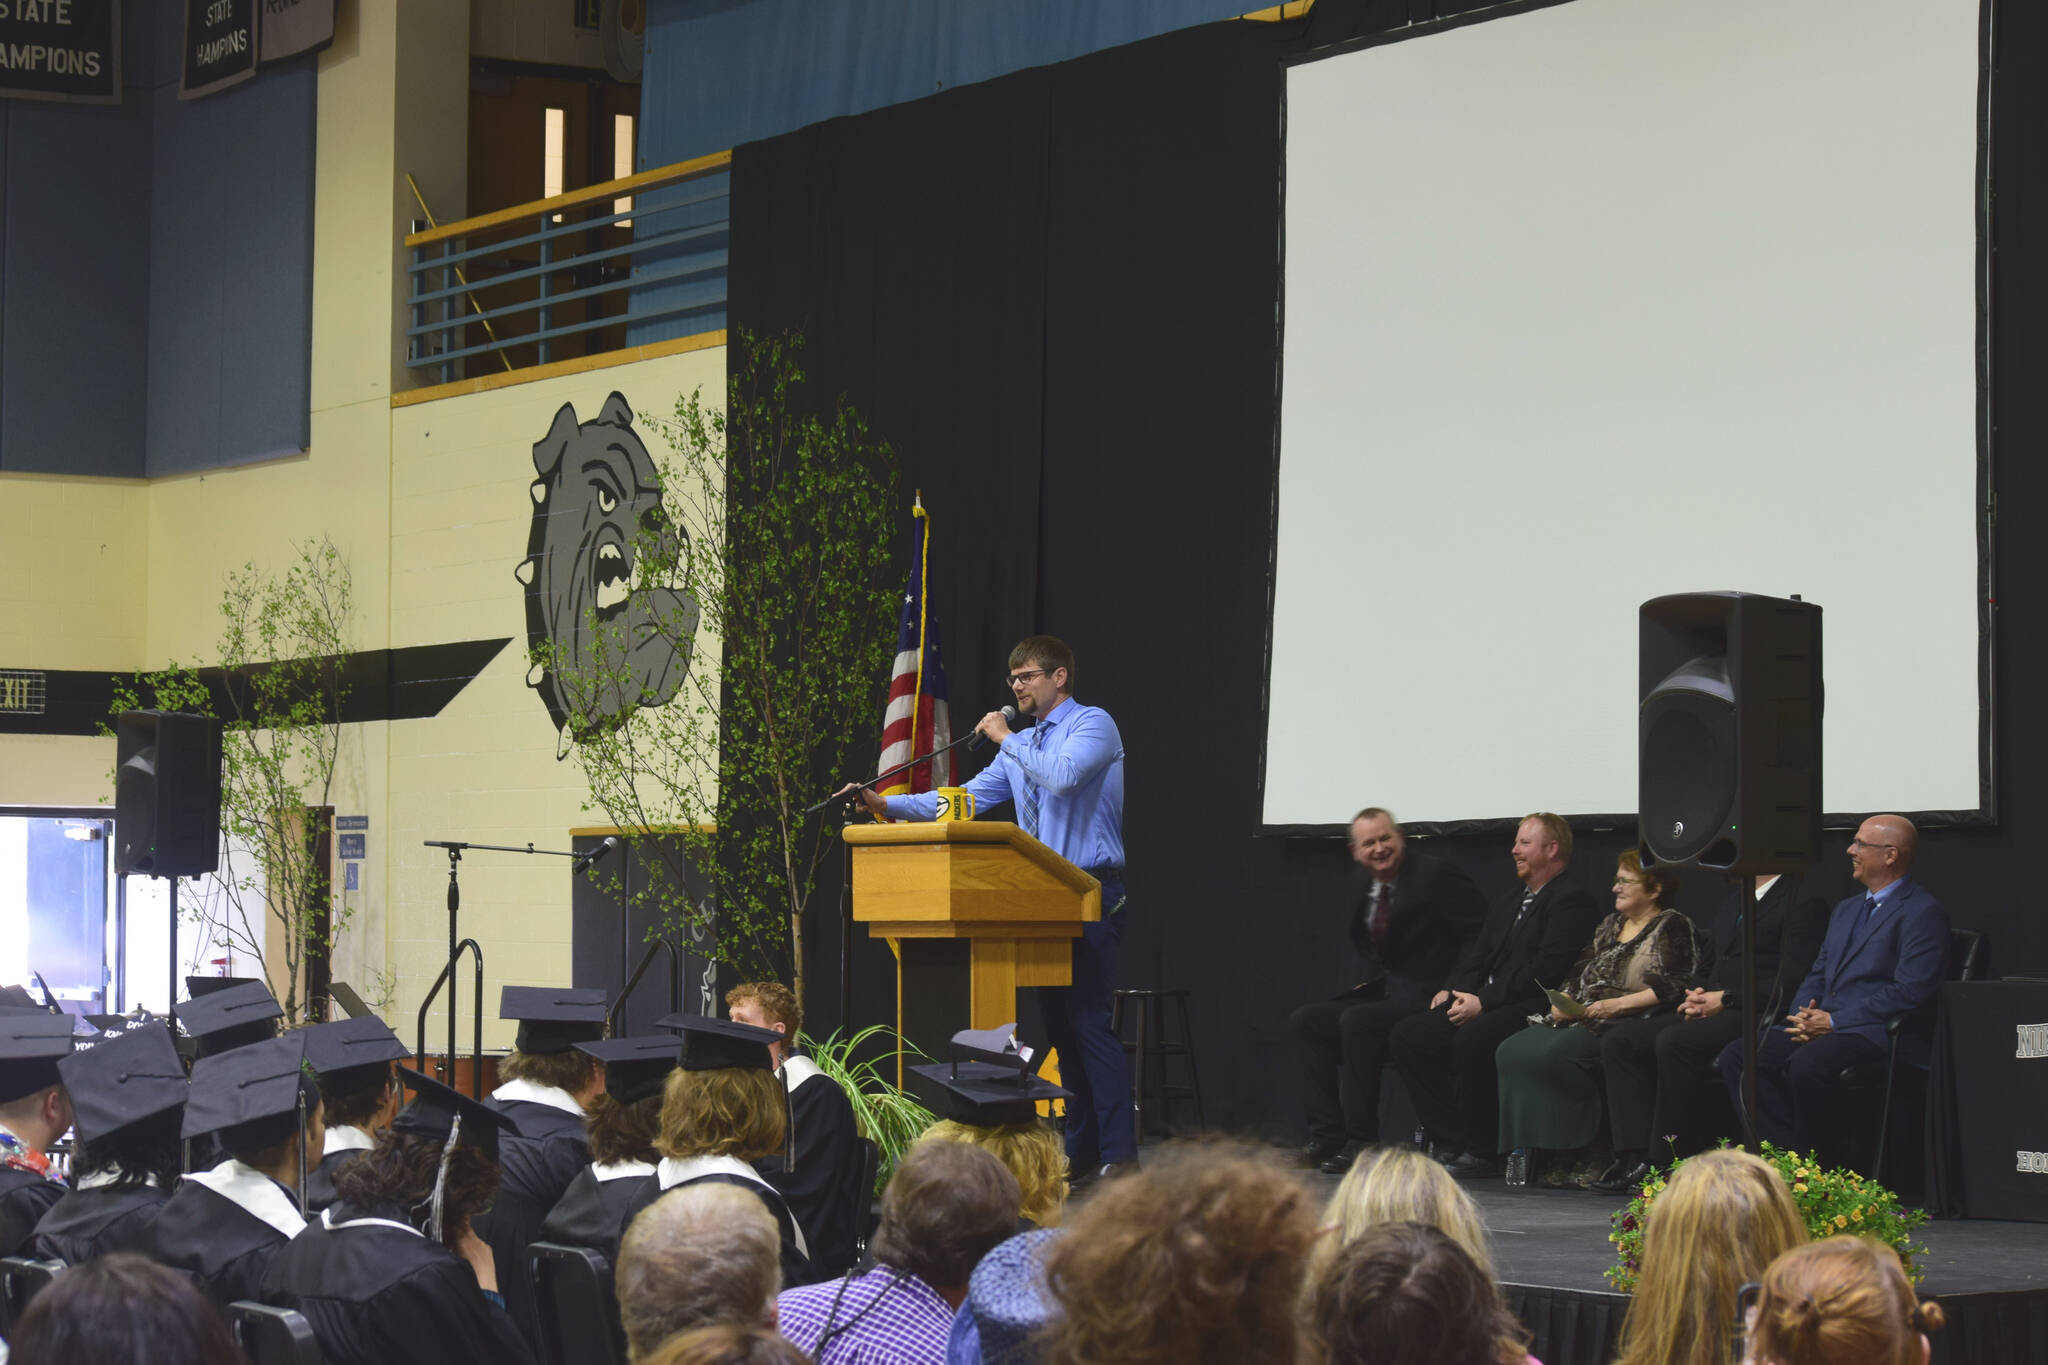 Nikiski Middle/High School teacher Jesse Bjorkman delivers a commencement address at the school’s 2022 commencement ceremony on Monday, May 16, 2022 in Nikiski, Alaska. (Ashlyn O’Hara/Peninsula Clarion)